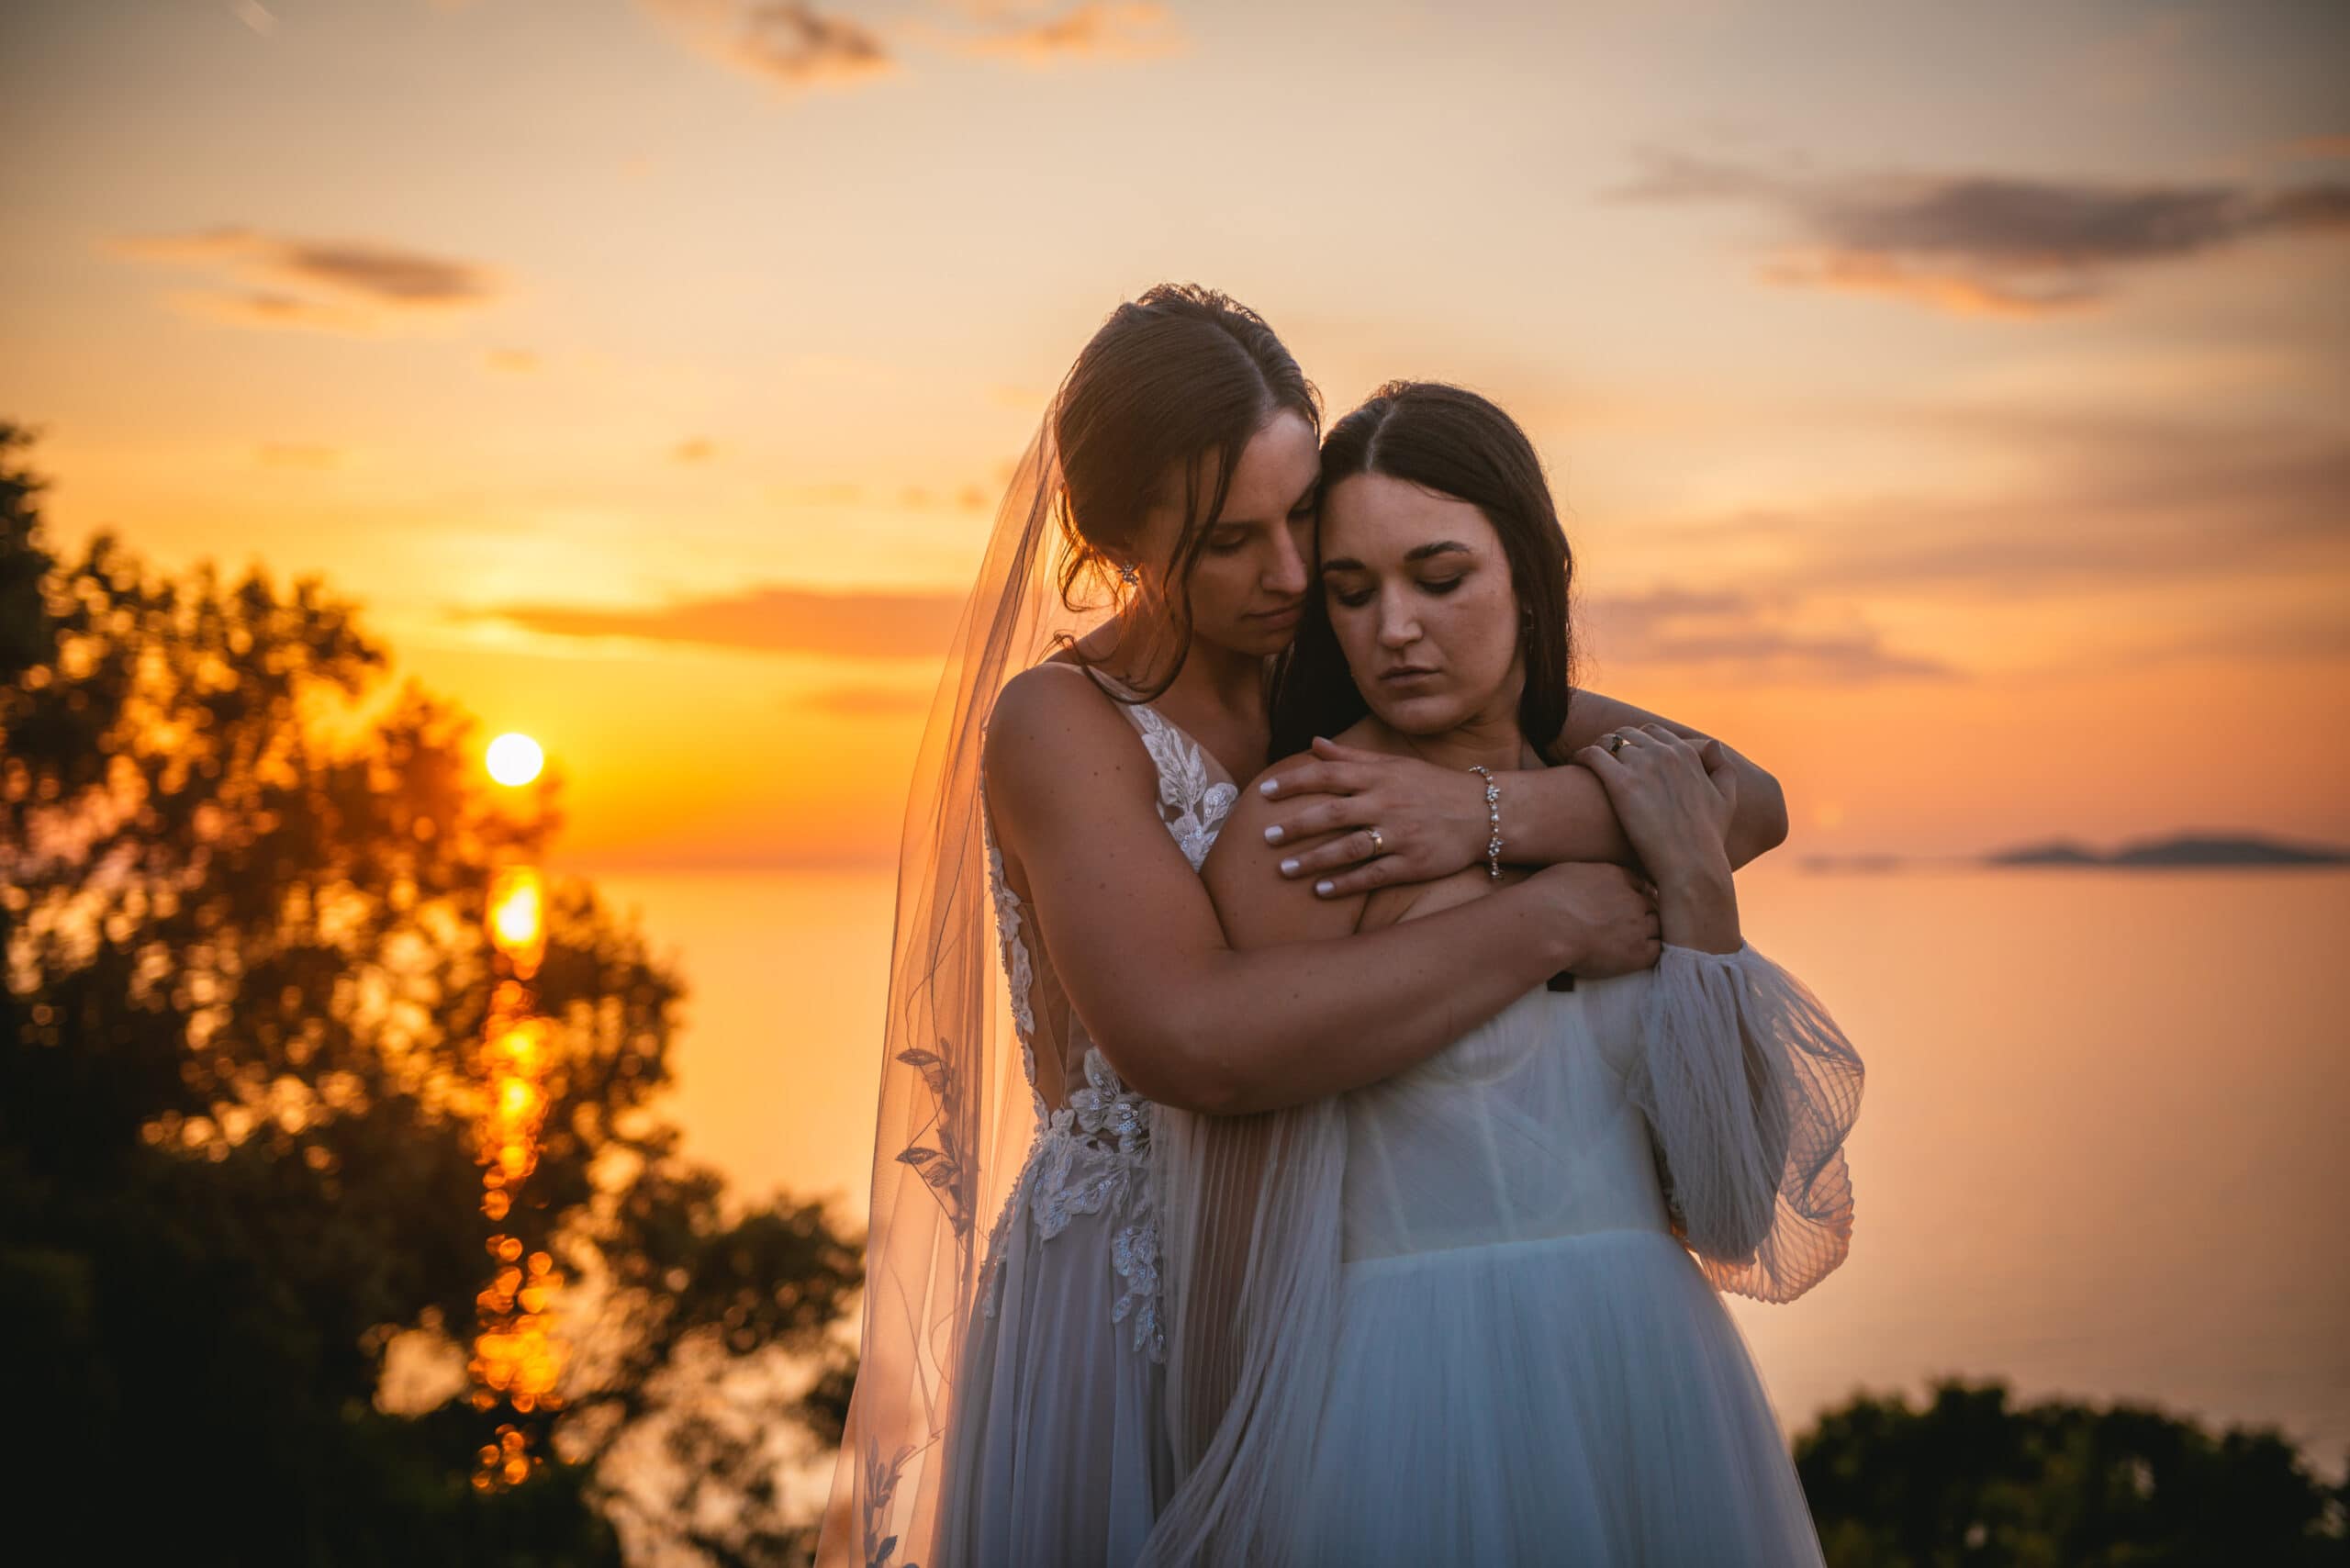 Brides snuggled in each other's arms as the sun sets, a warm moment in Corfu elopement.